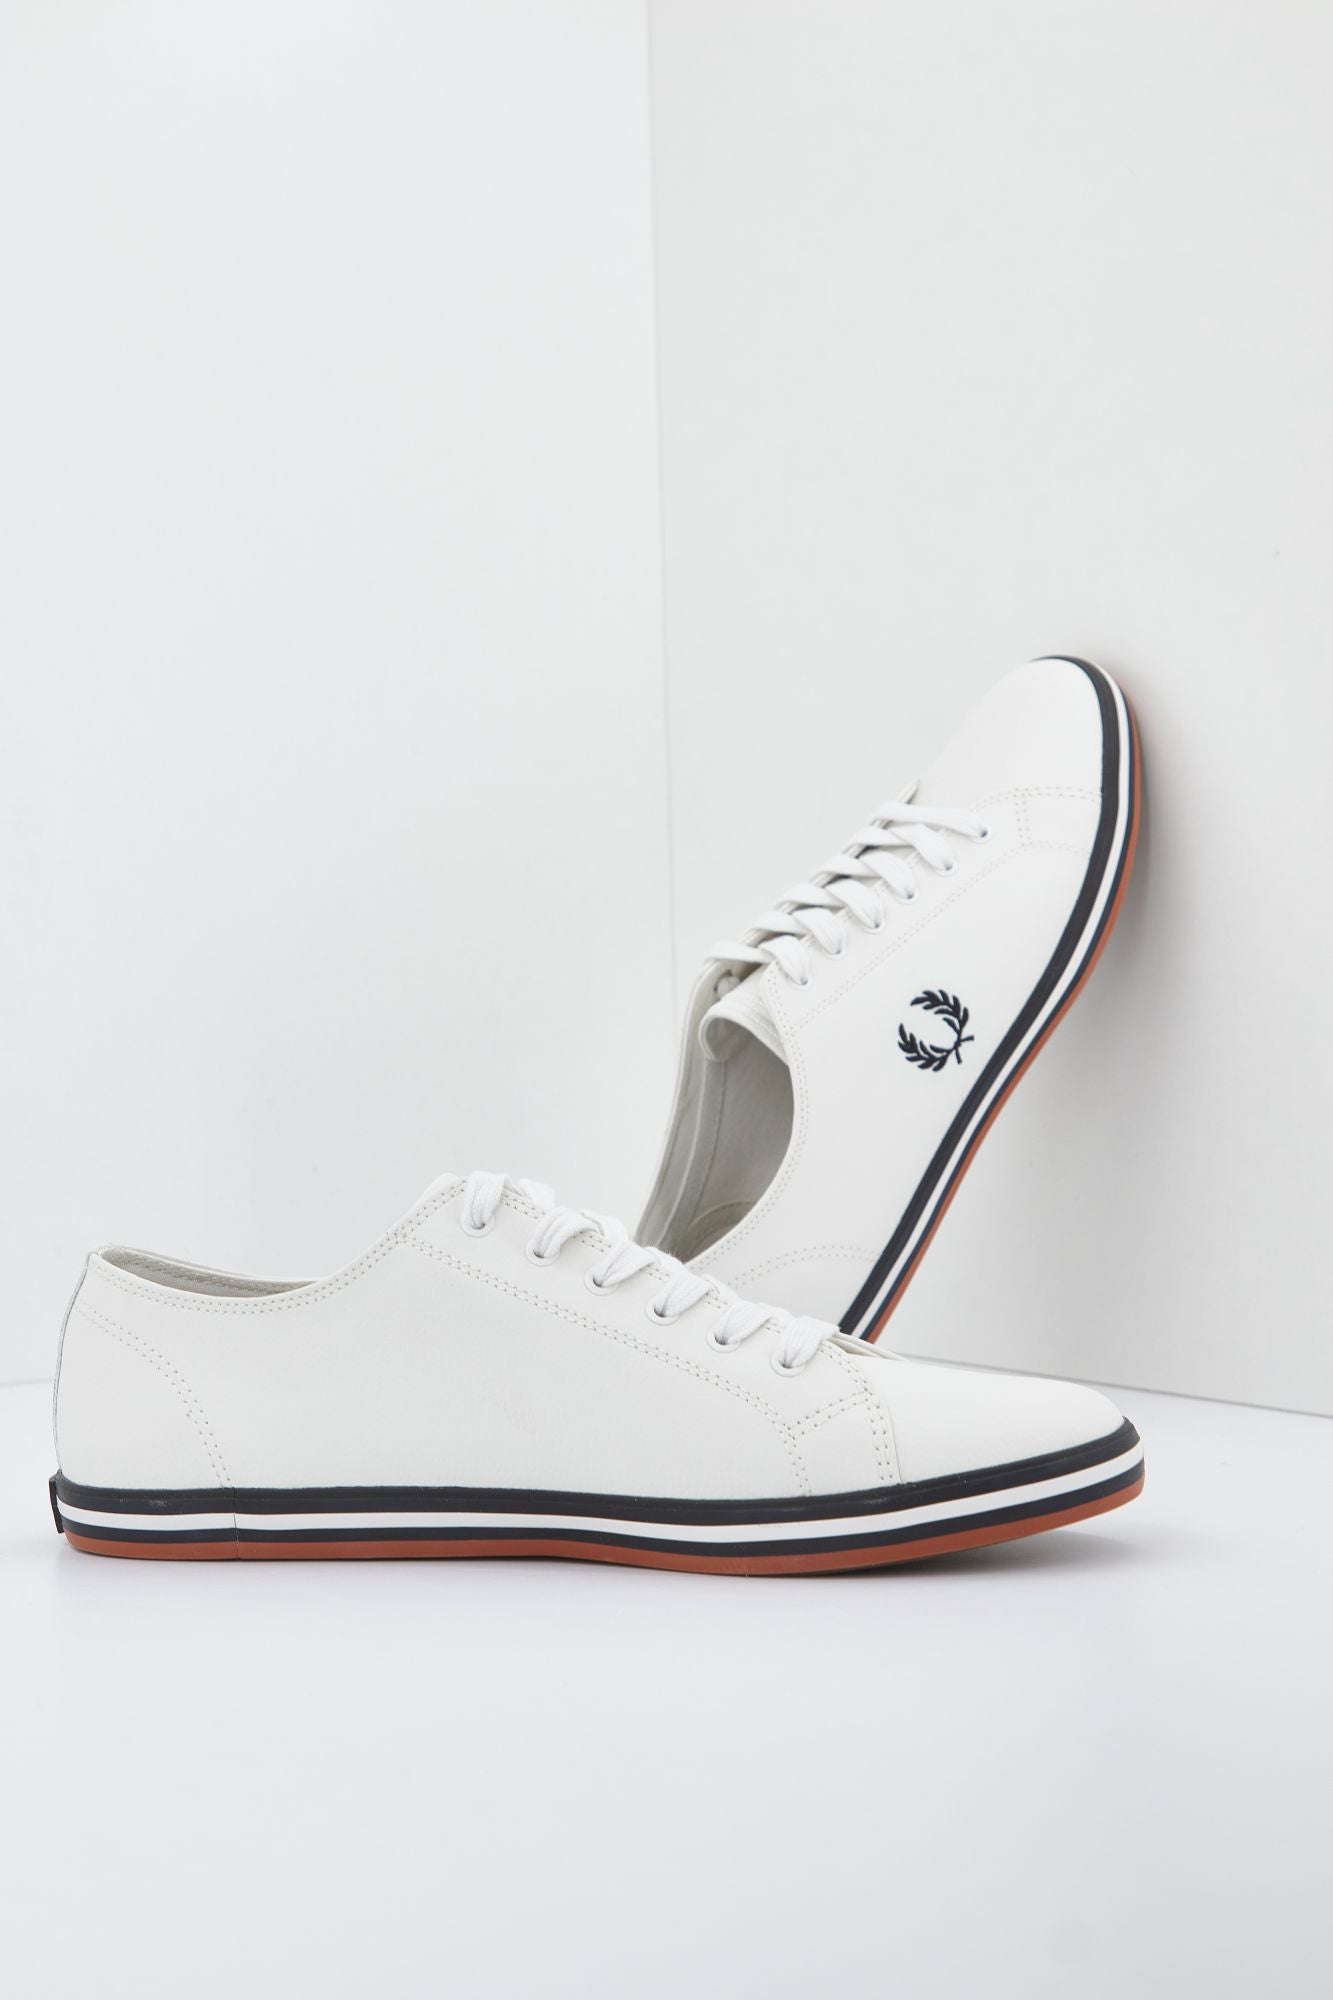 FRED PERRY  KINGSTON LEATHER en color BLANCO (2)